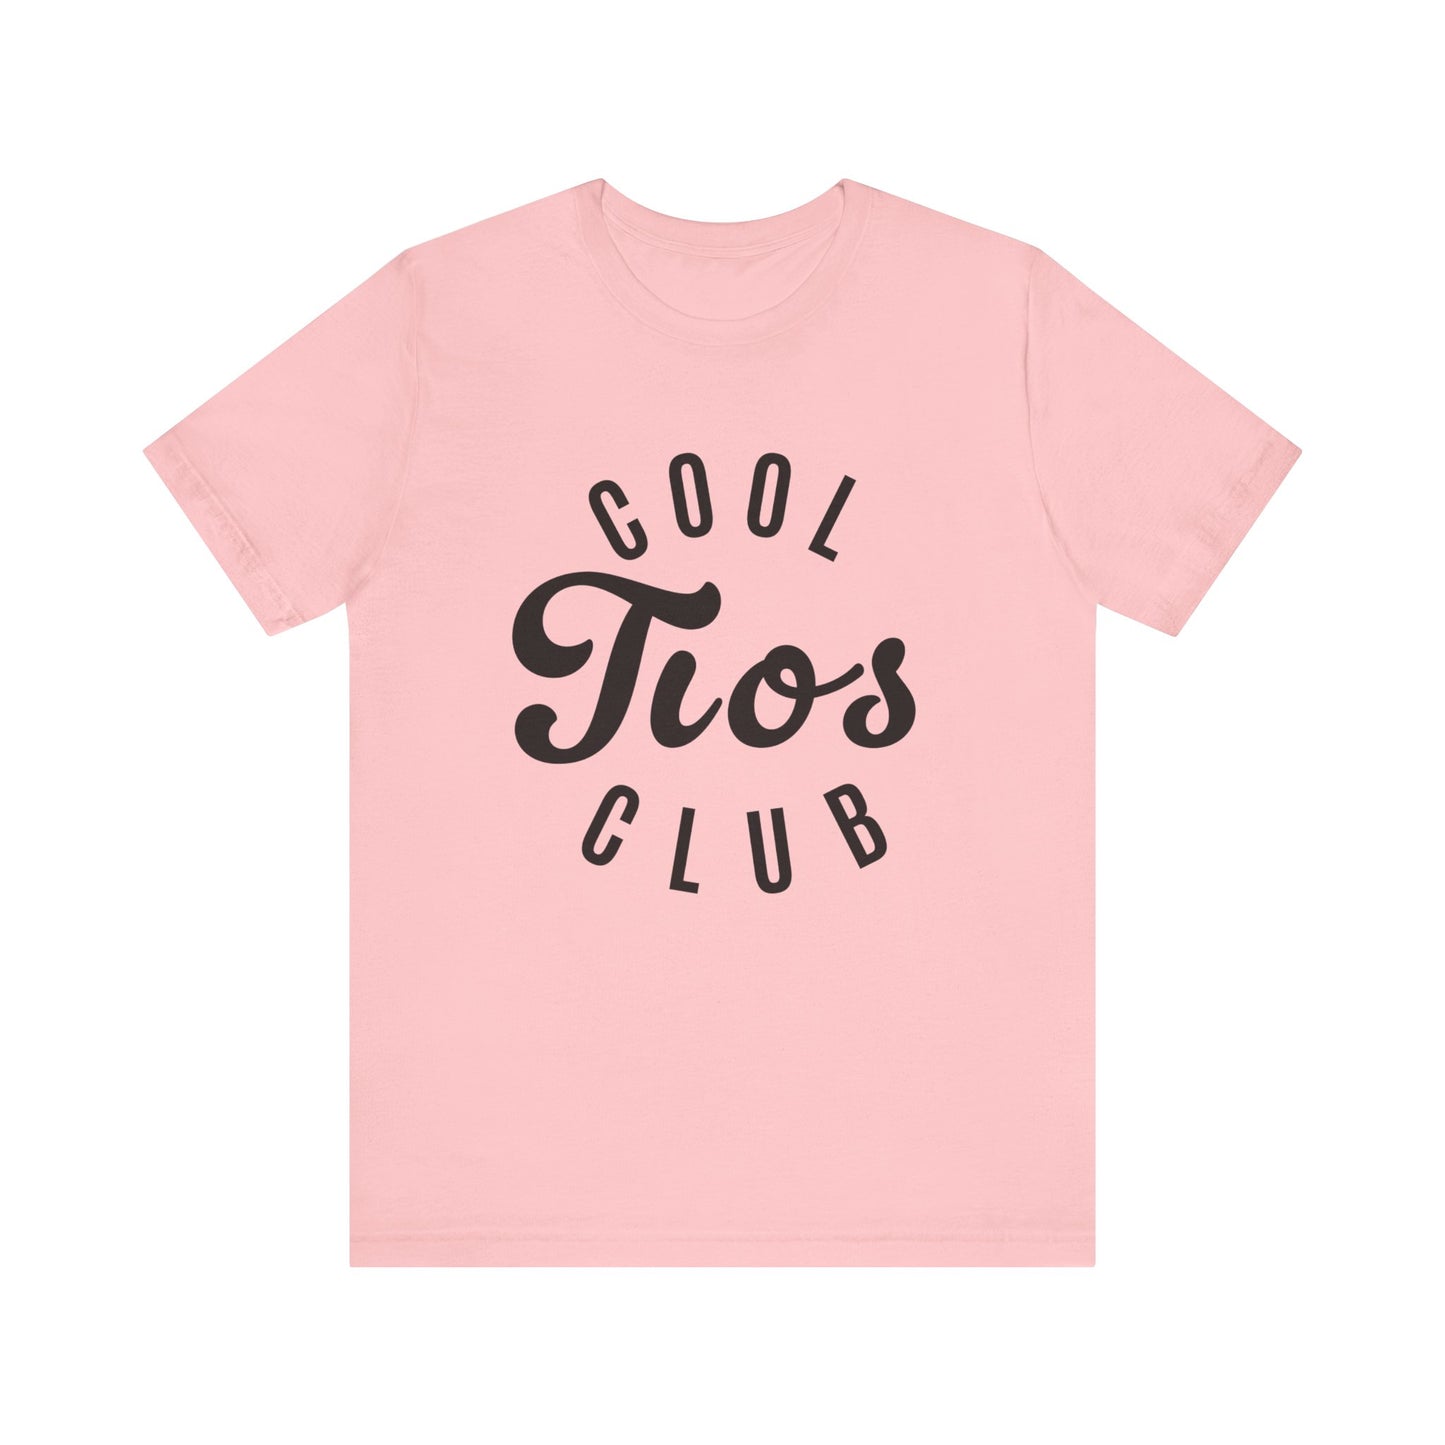 Cool Tios Club Shirt for Men, Pregnancy Announcement TShirt for Tios, Cool Tios T-Shirt for New Tios, Funny Gift for Tios to Be, T1095